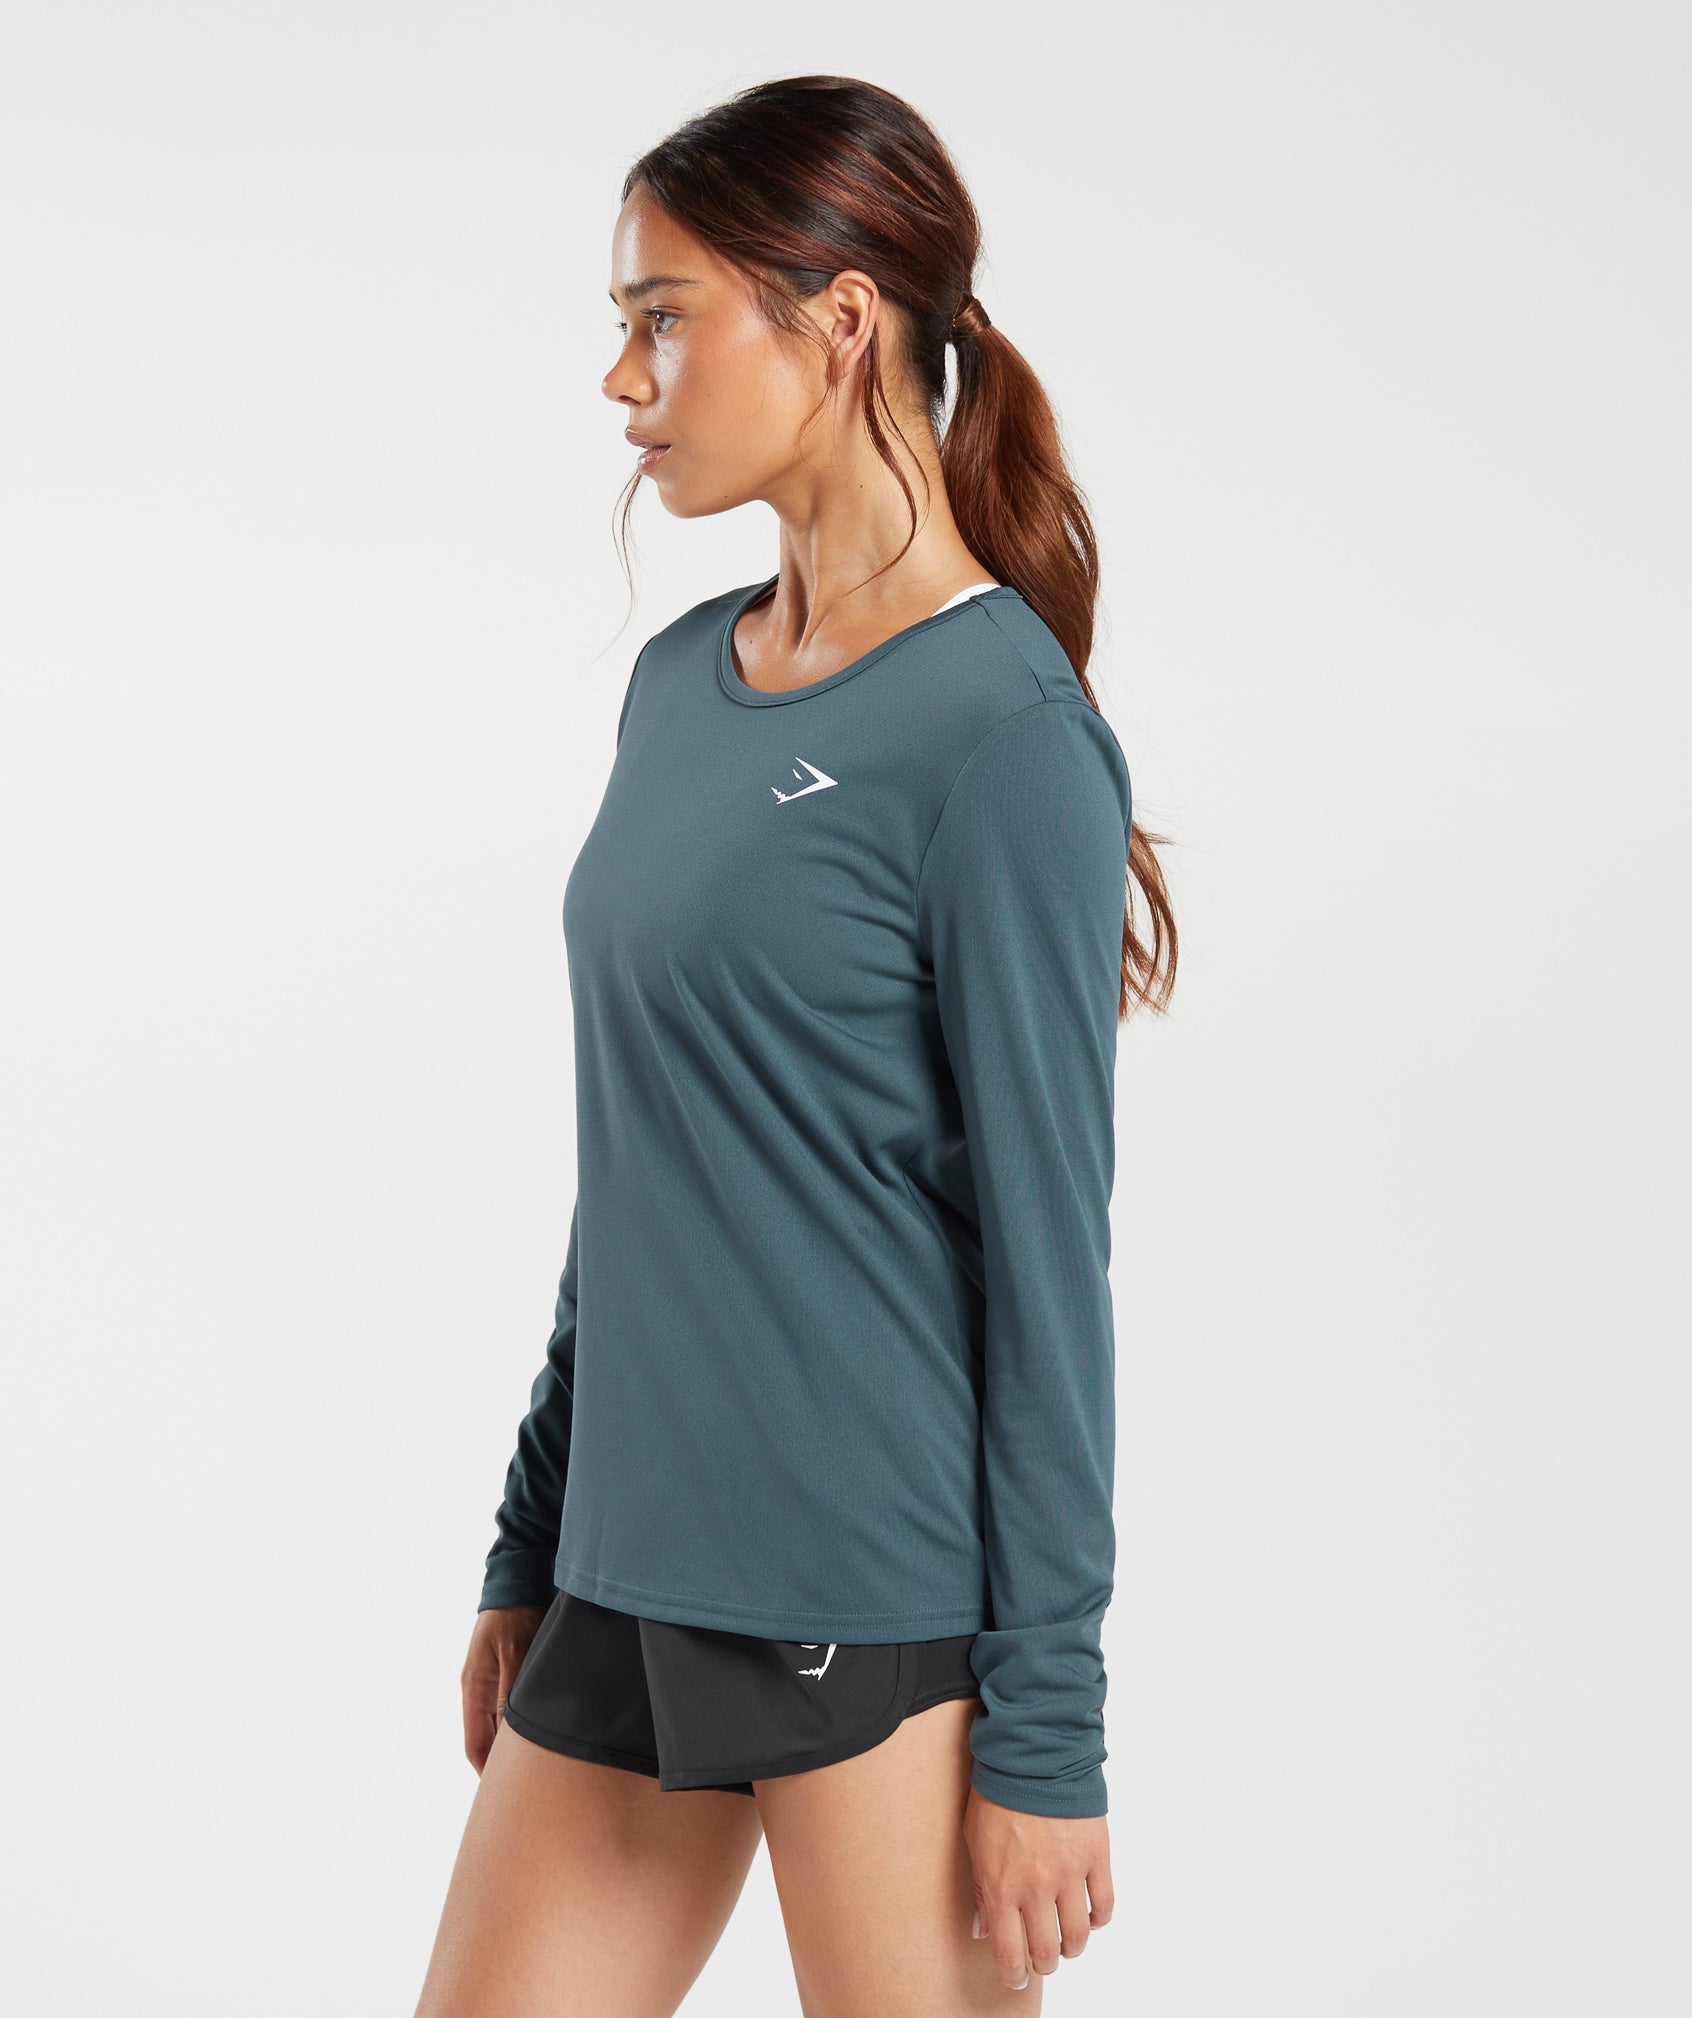 Training Long Sleeve Top in Smokey Teal - view 3